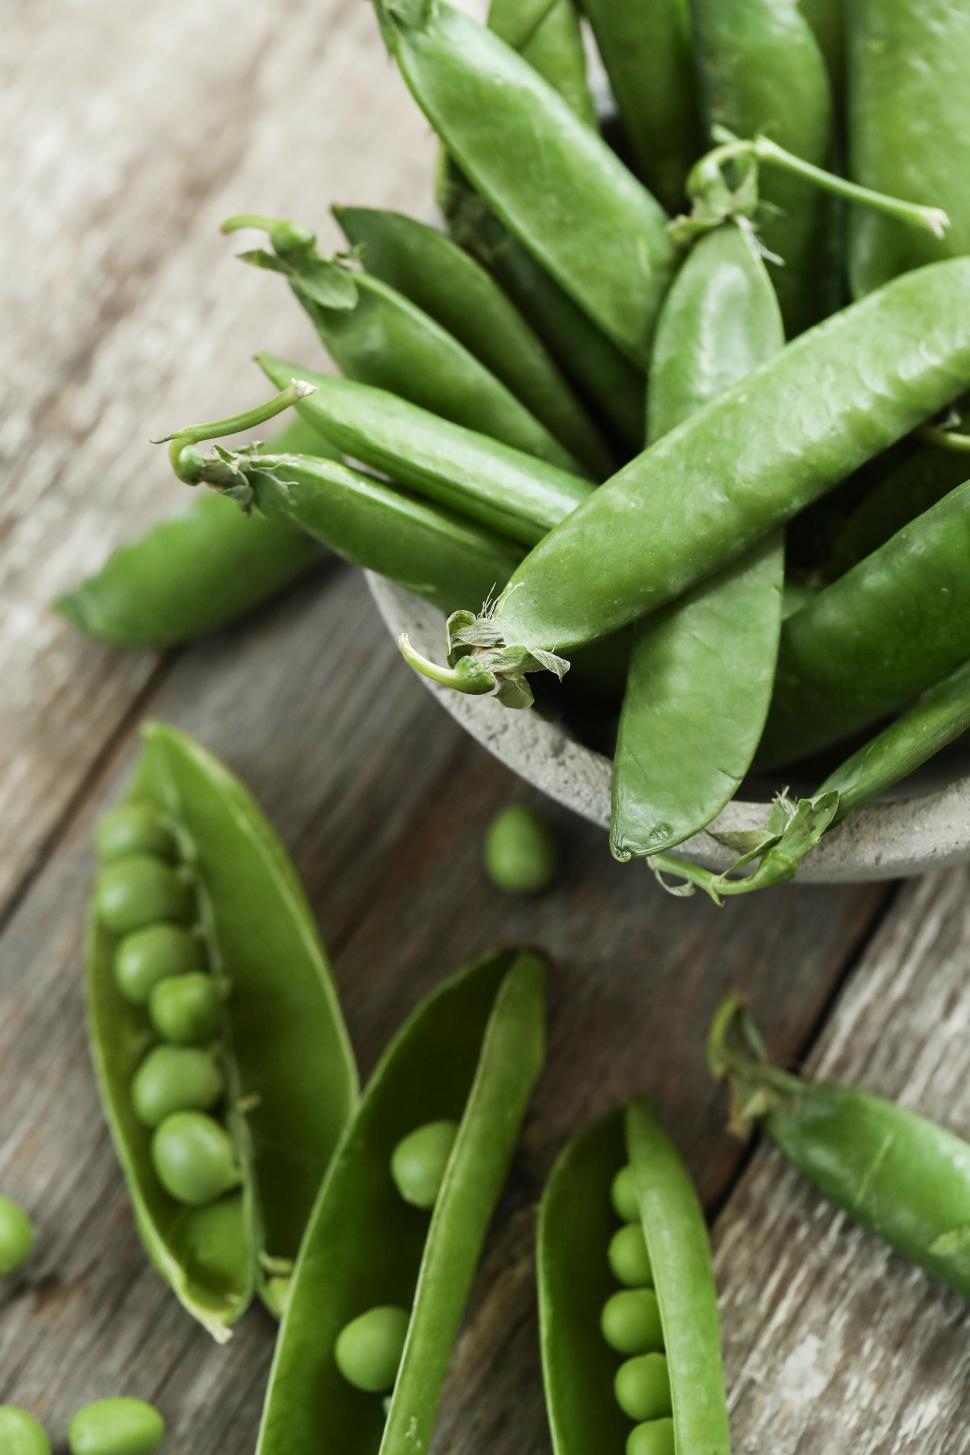 Free Image of Green peas and pods 